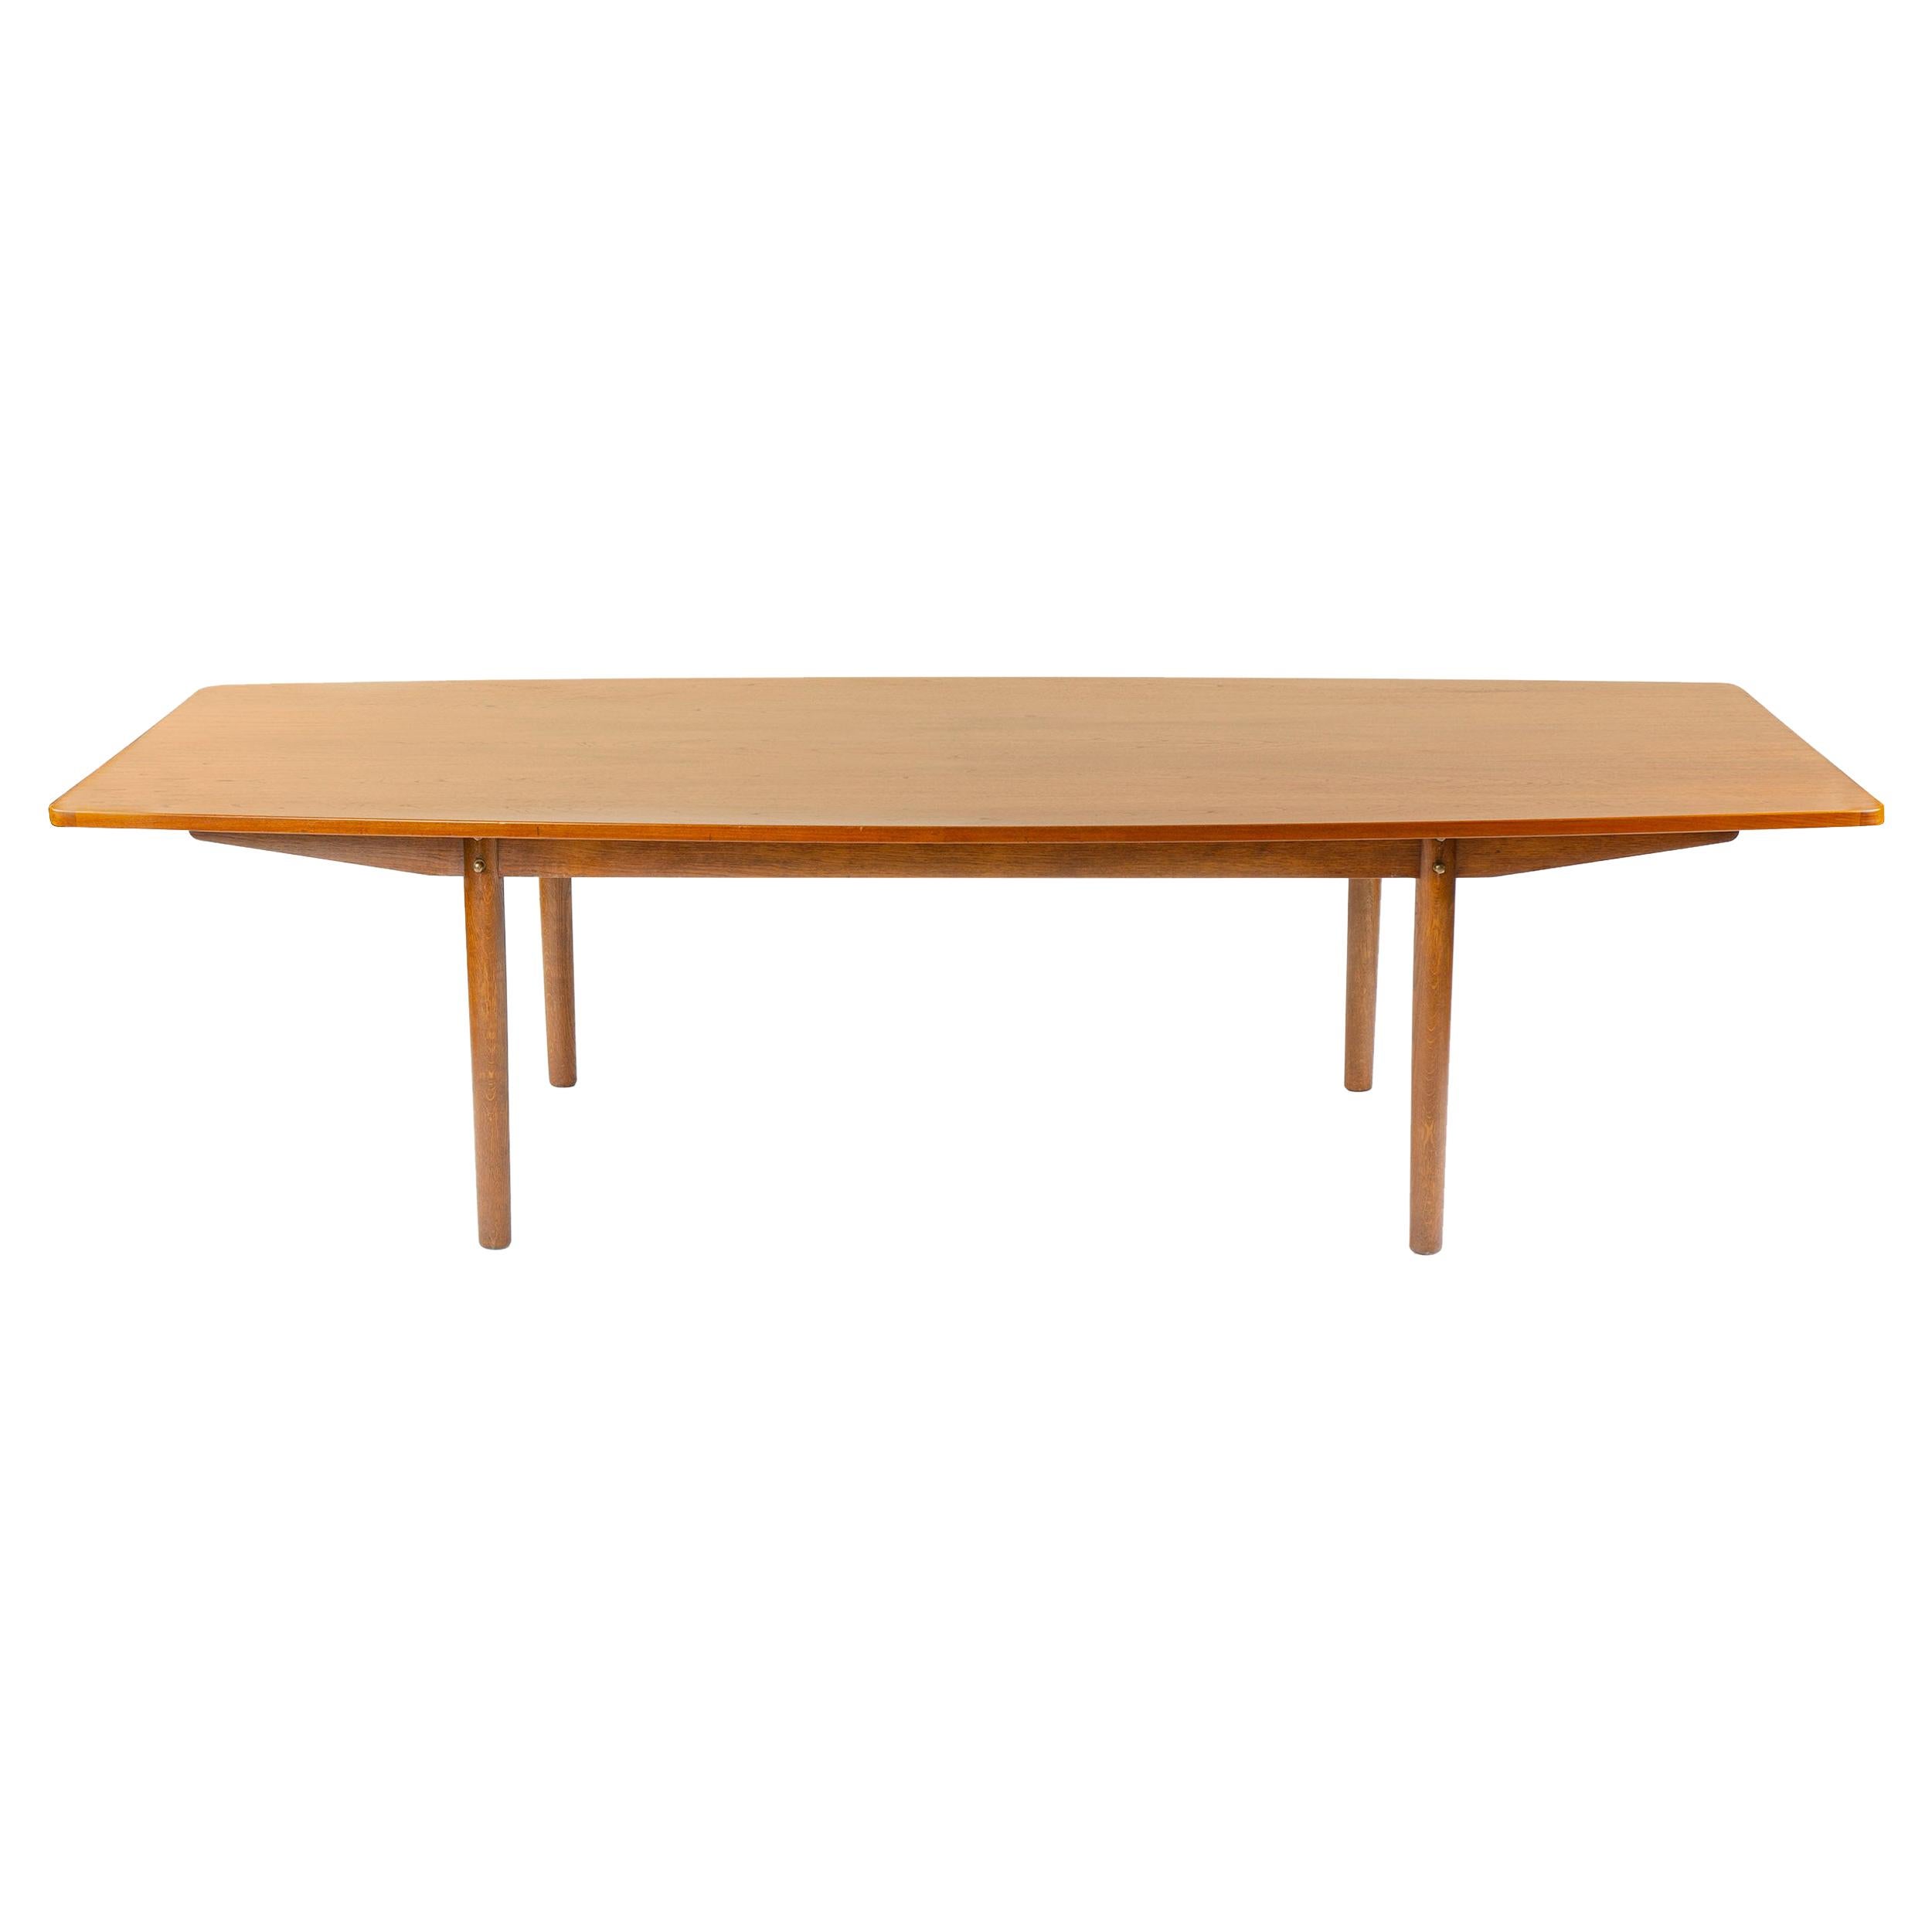 Large Teak Dining Table / Conference Table by Borge Mogensen for Karlsson